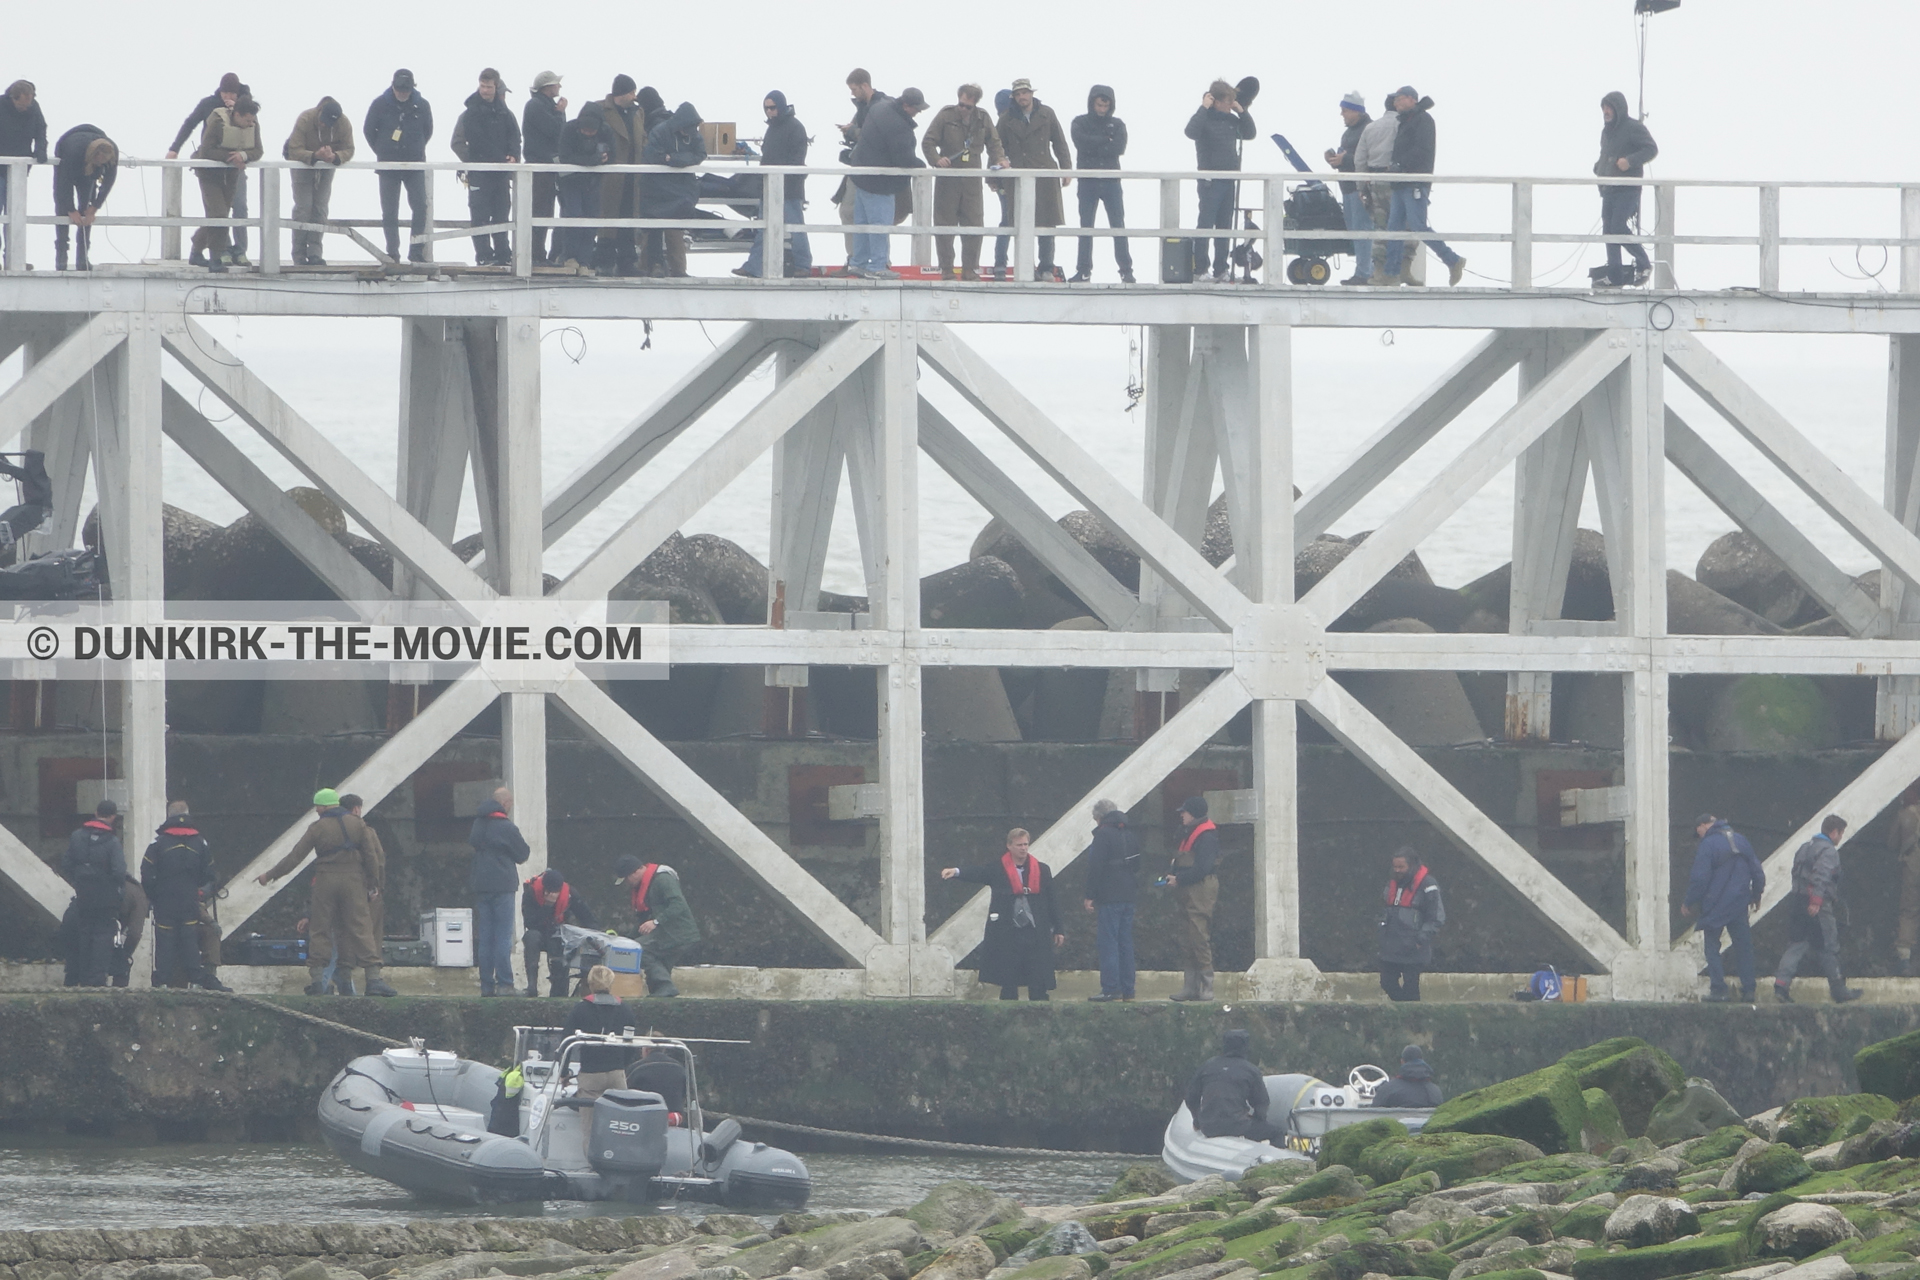 Picture with EST pier, technical team, inflatable dinghy, Nilo Otero,  from behind the scene of the Dunkirk movie by Nolan